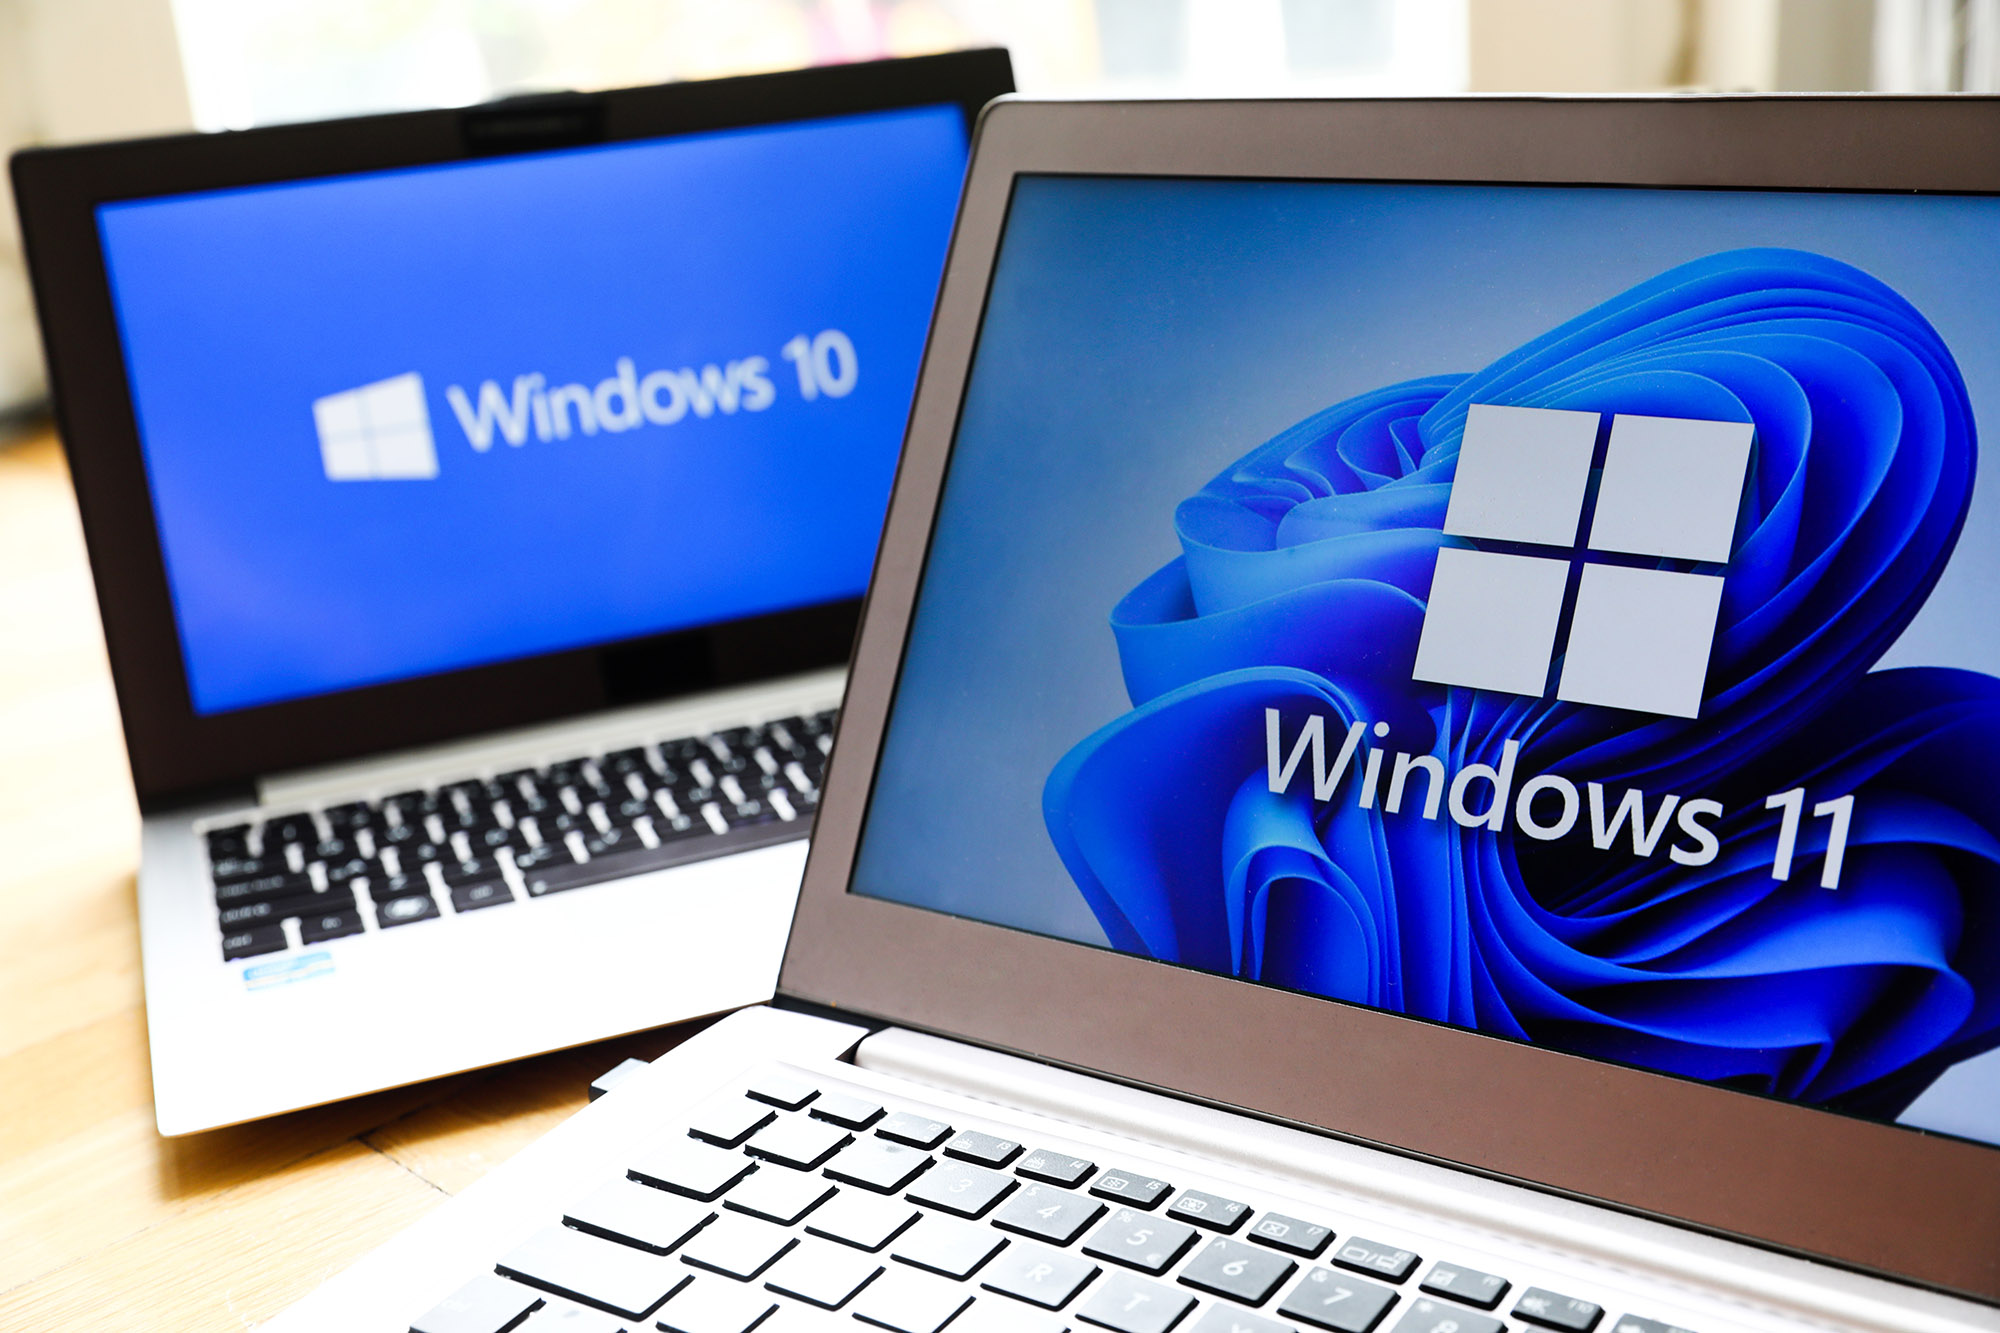 Microsoft to charge for Windows 10 updates in the future